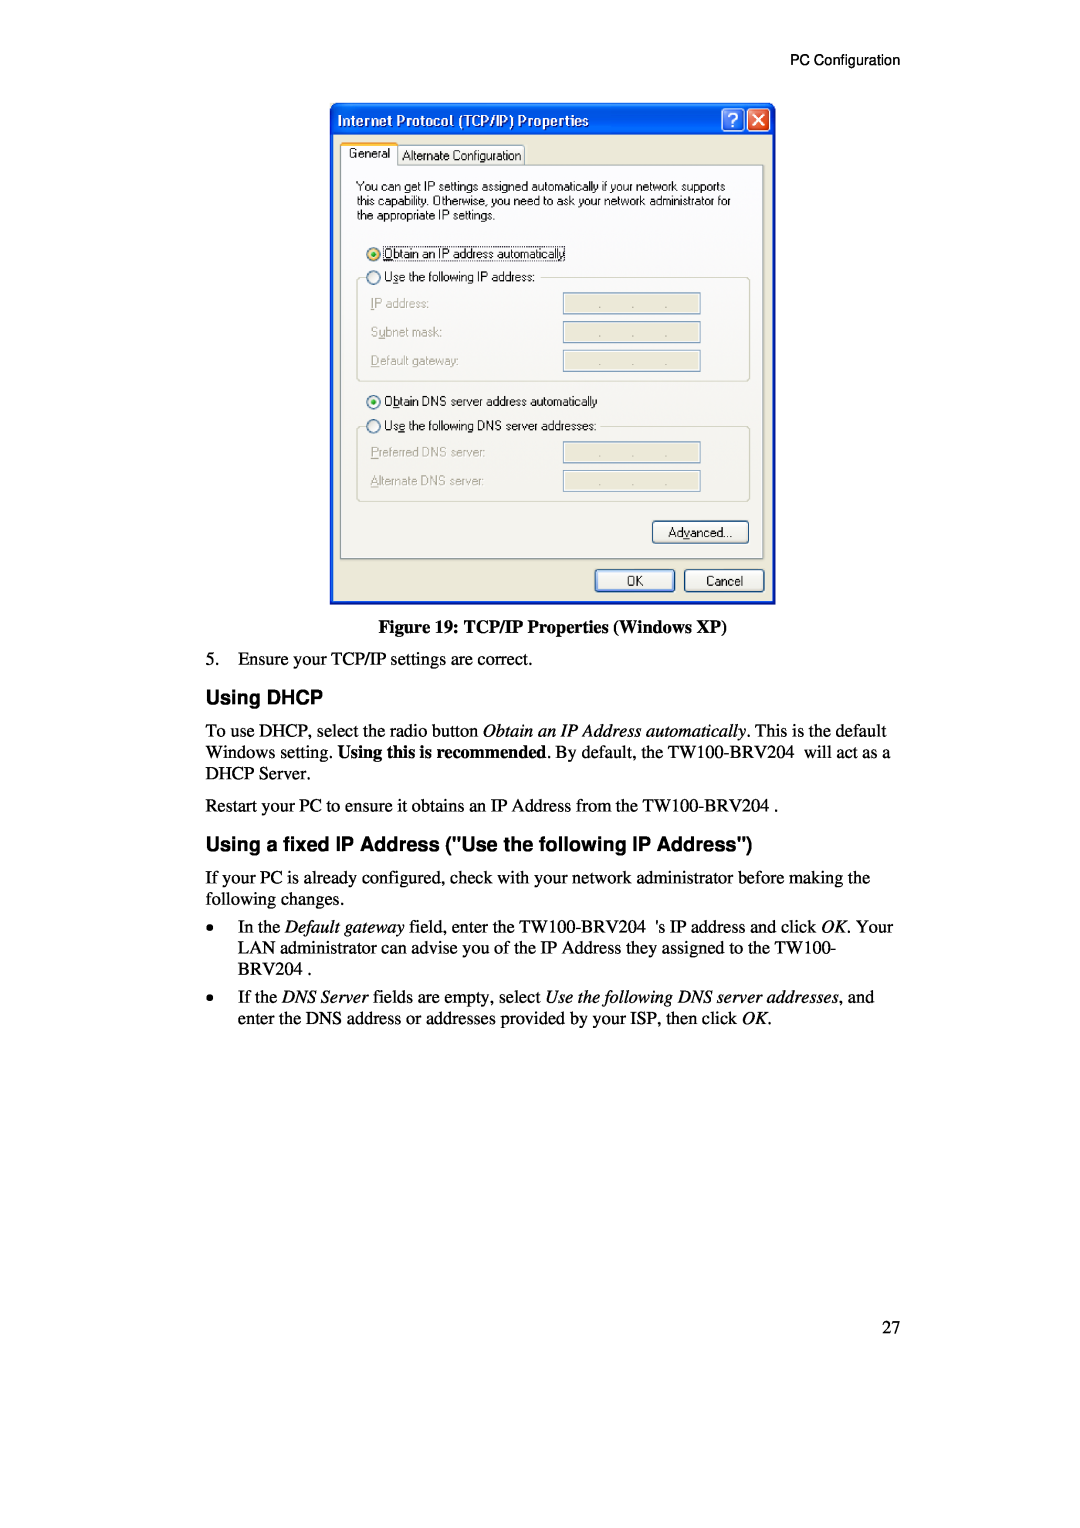 TRENDnet BRV204 manual Using DHCP, Using a fixed IP Address Use the following IP Address, TCP/IP Properties Windows XP 